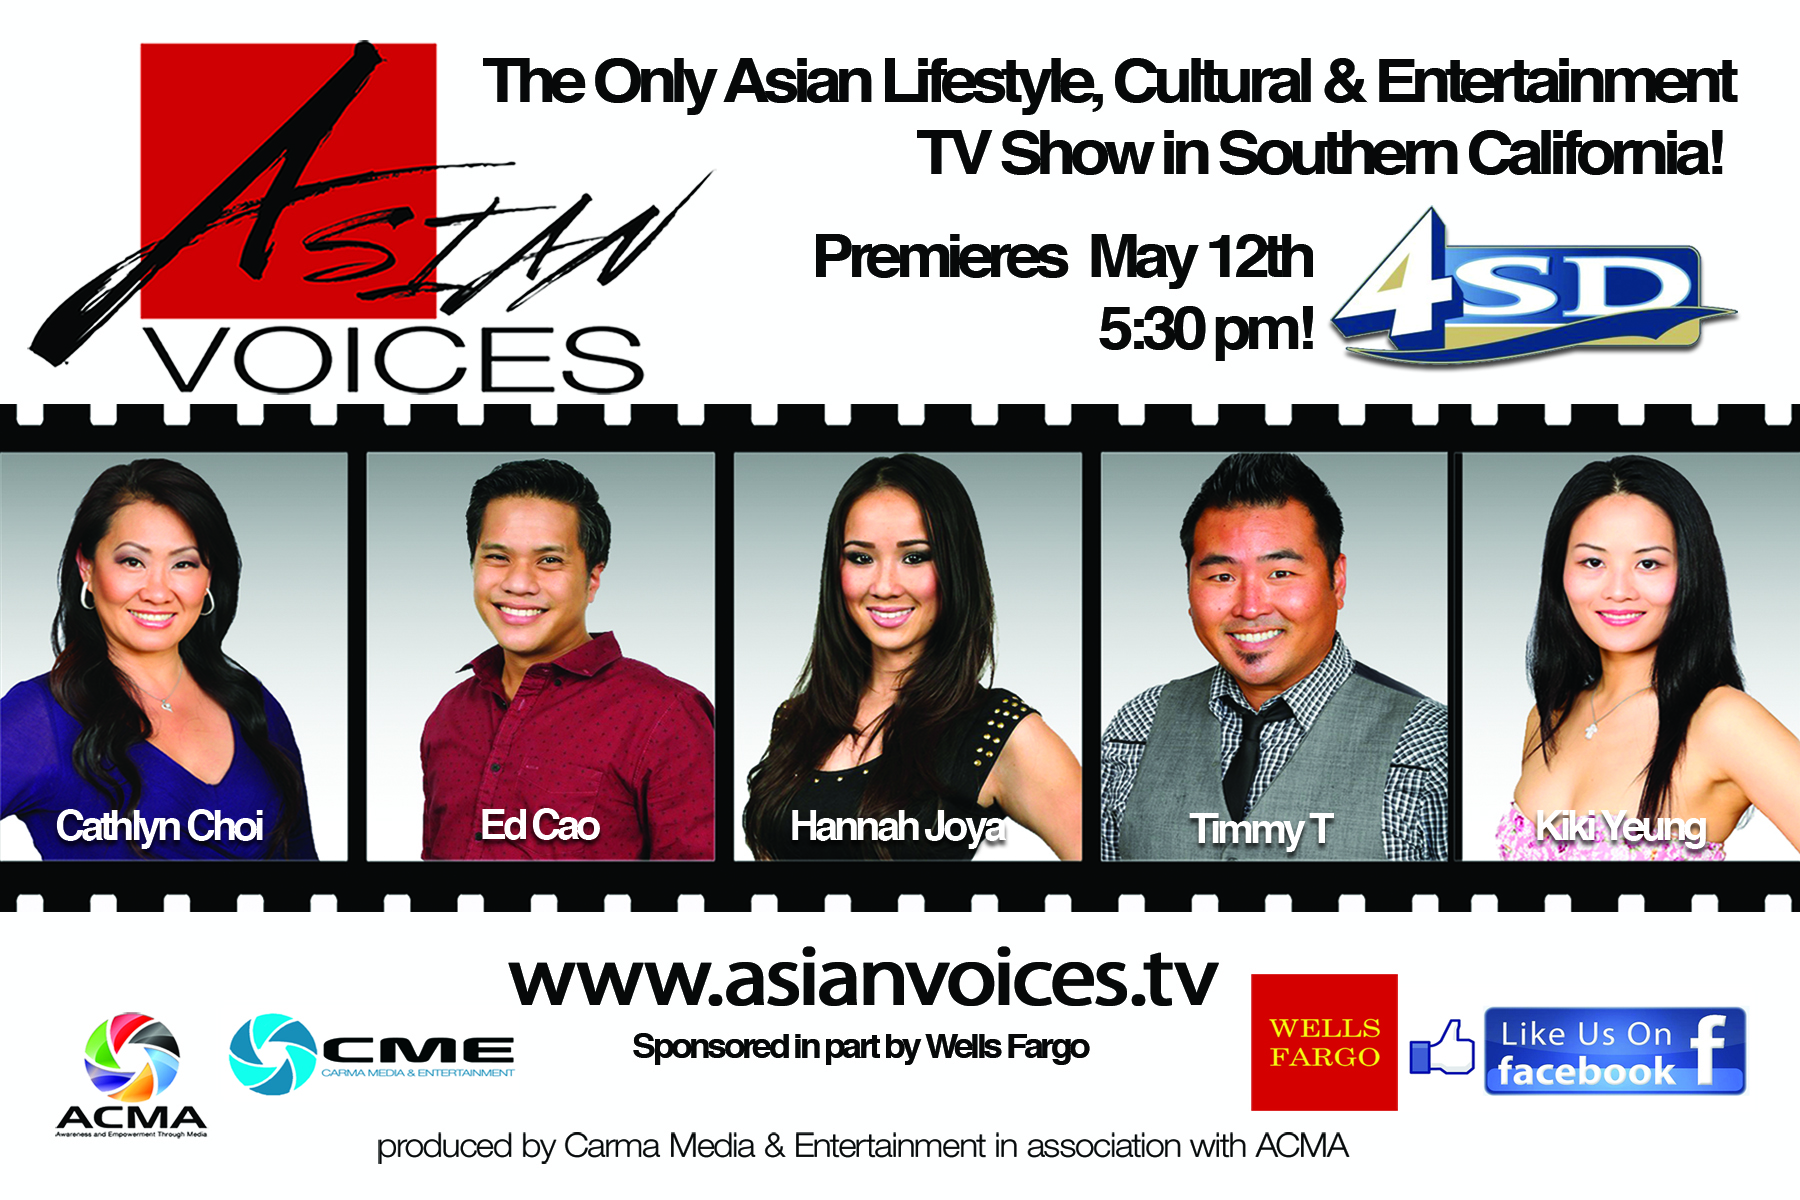 Asian Voices is a new and exciting Culture, Lifestyle and Entertainment TV show featuring the Asian and Pacific Islander (API) community in Southern California.